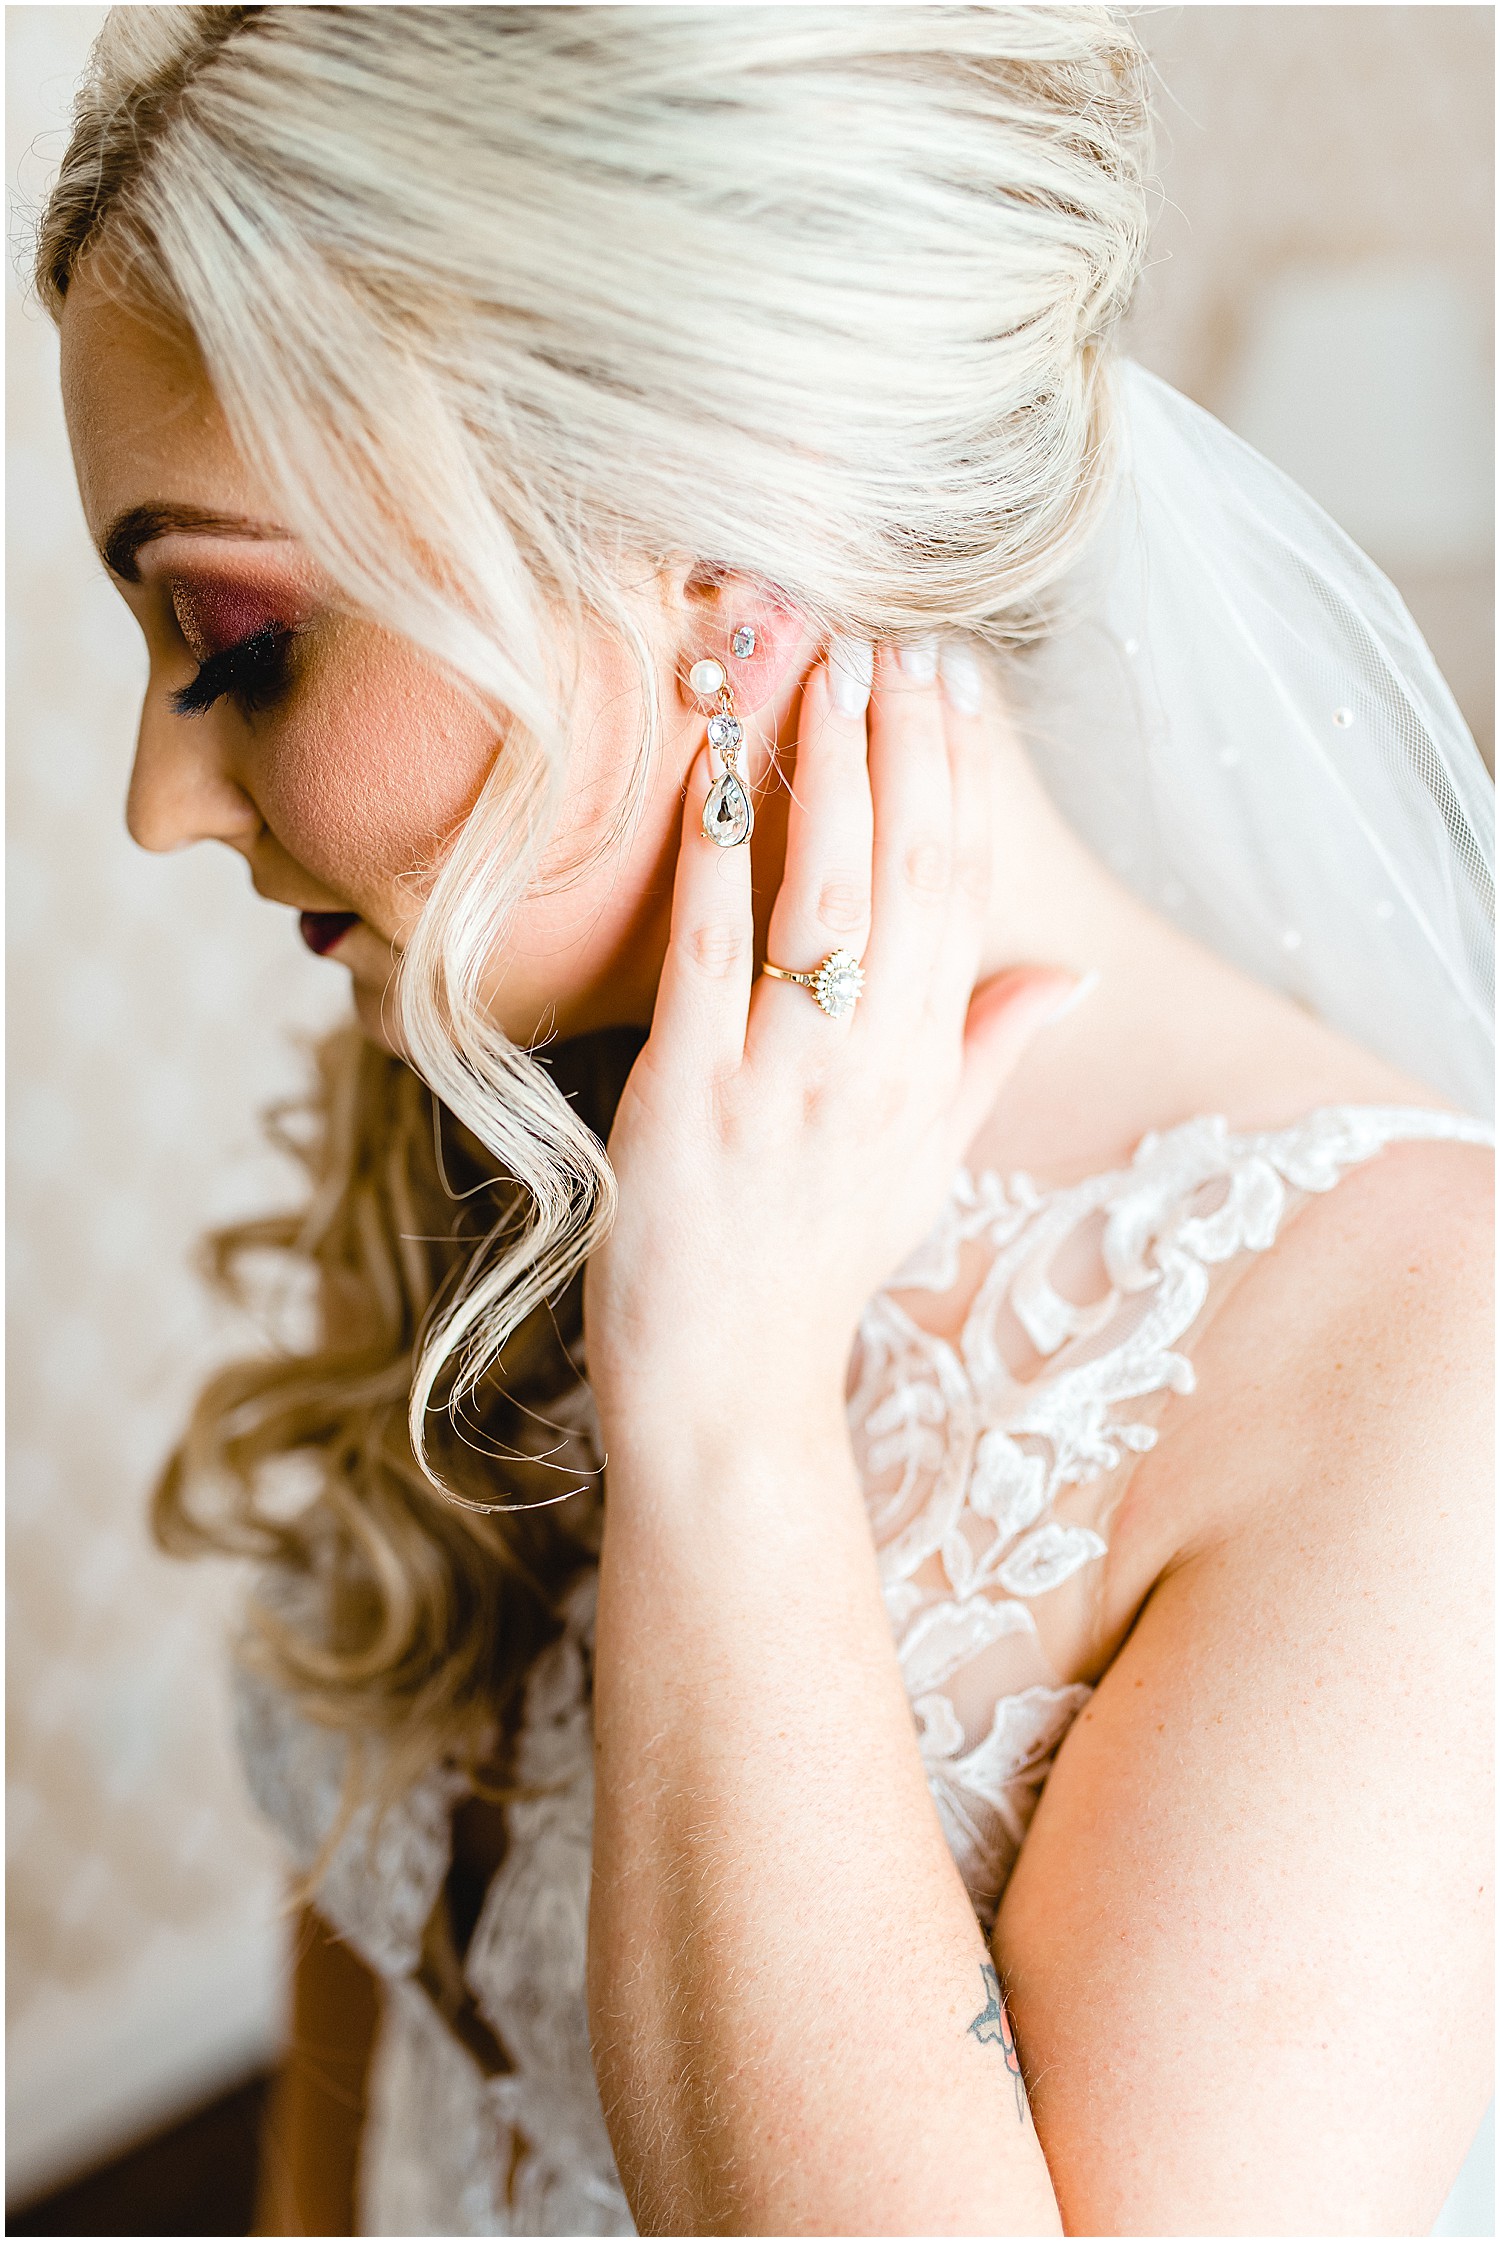 bride touches neck with rings and earrings showing